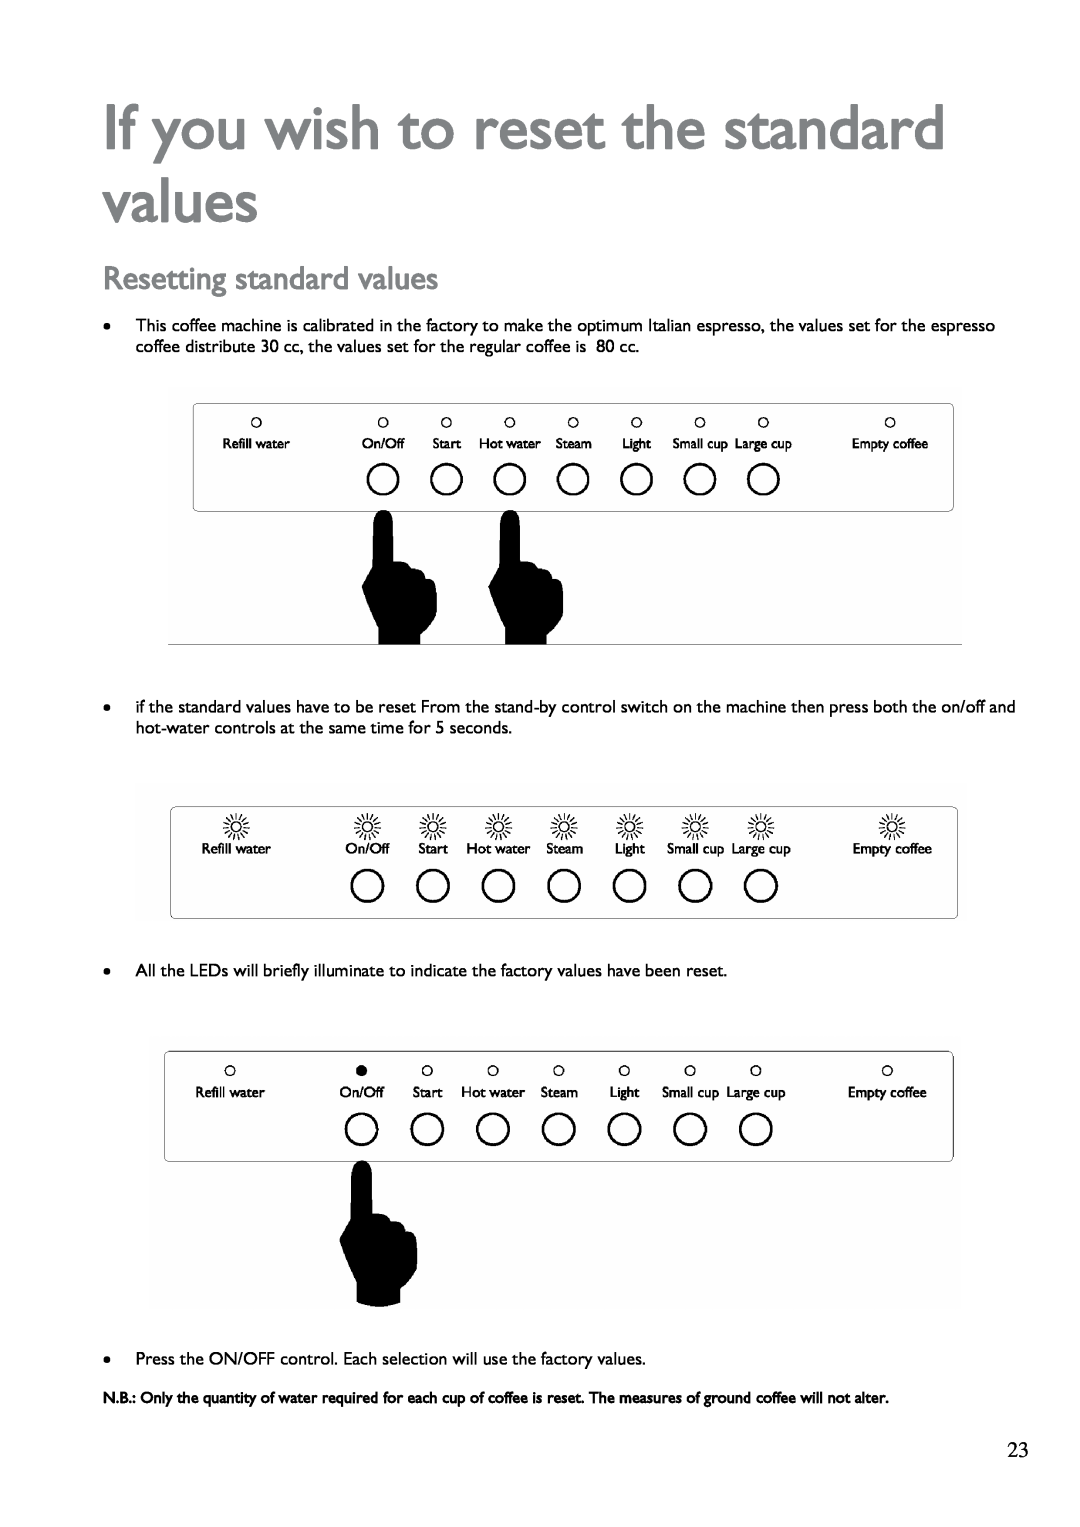 John Lewis JLBICM 01 instruction manual If you wish to reset the standard values, Resetting standard values 